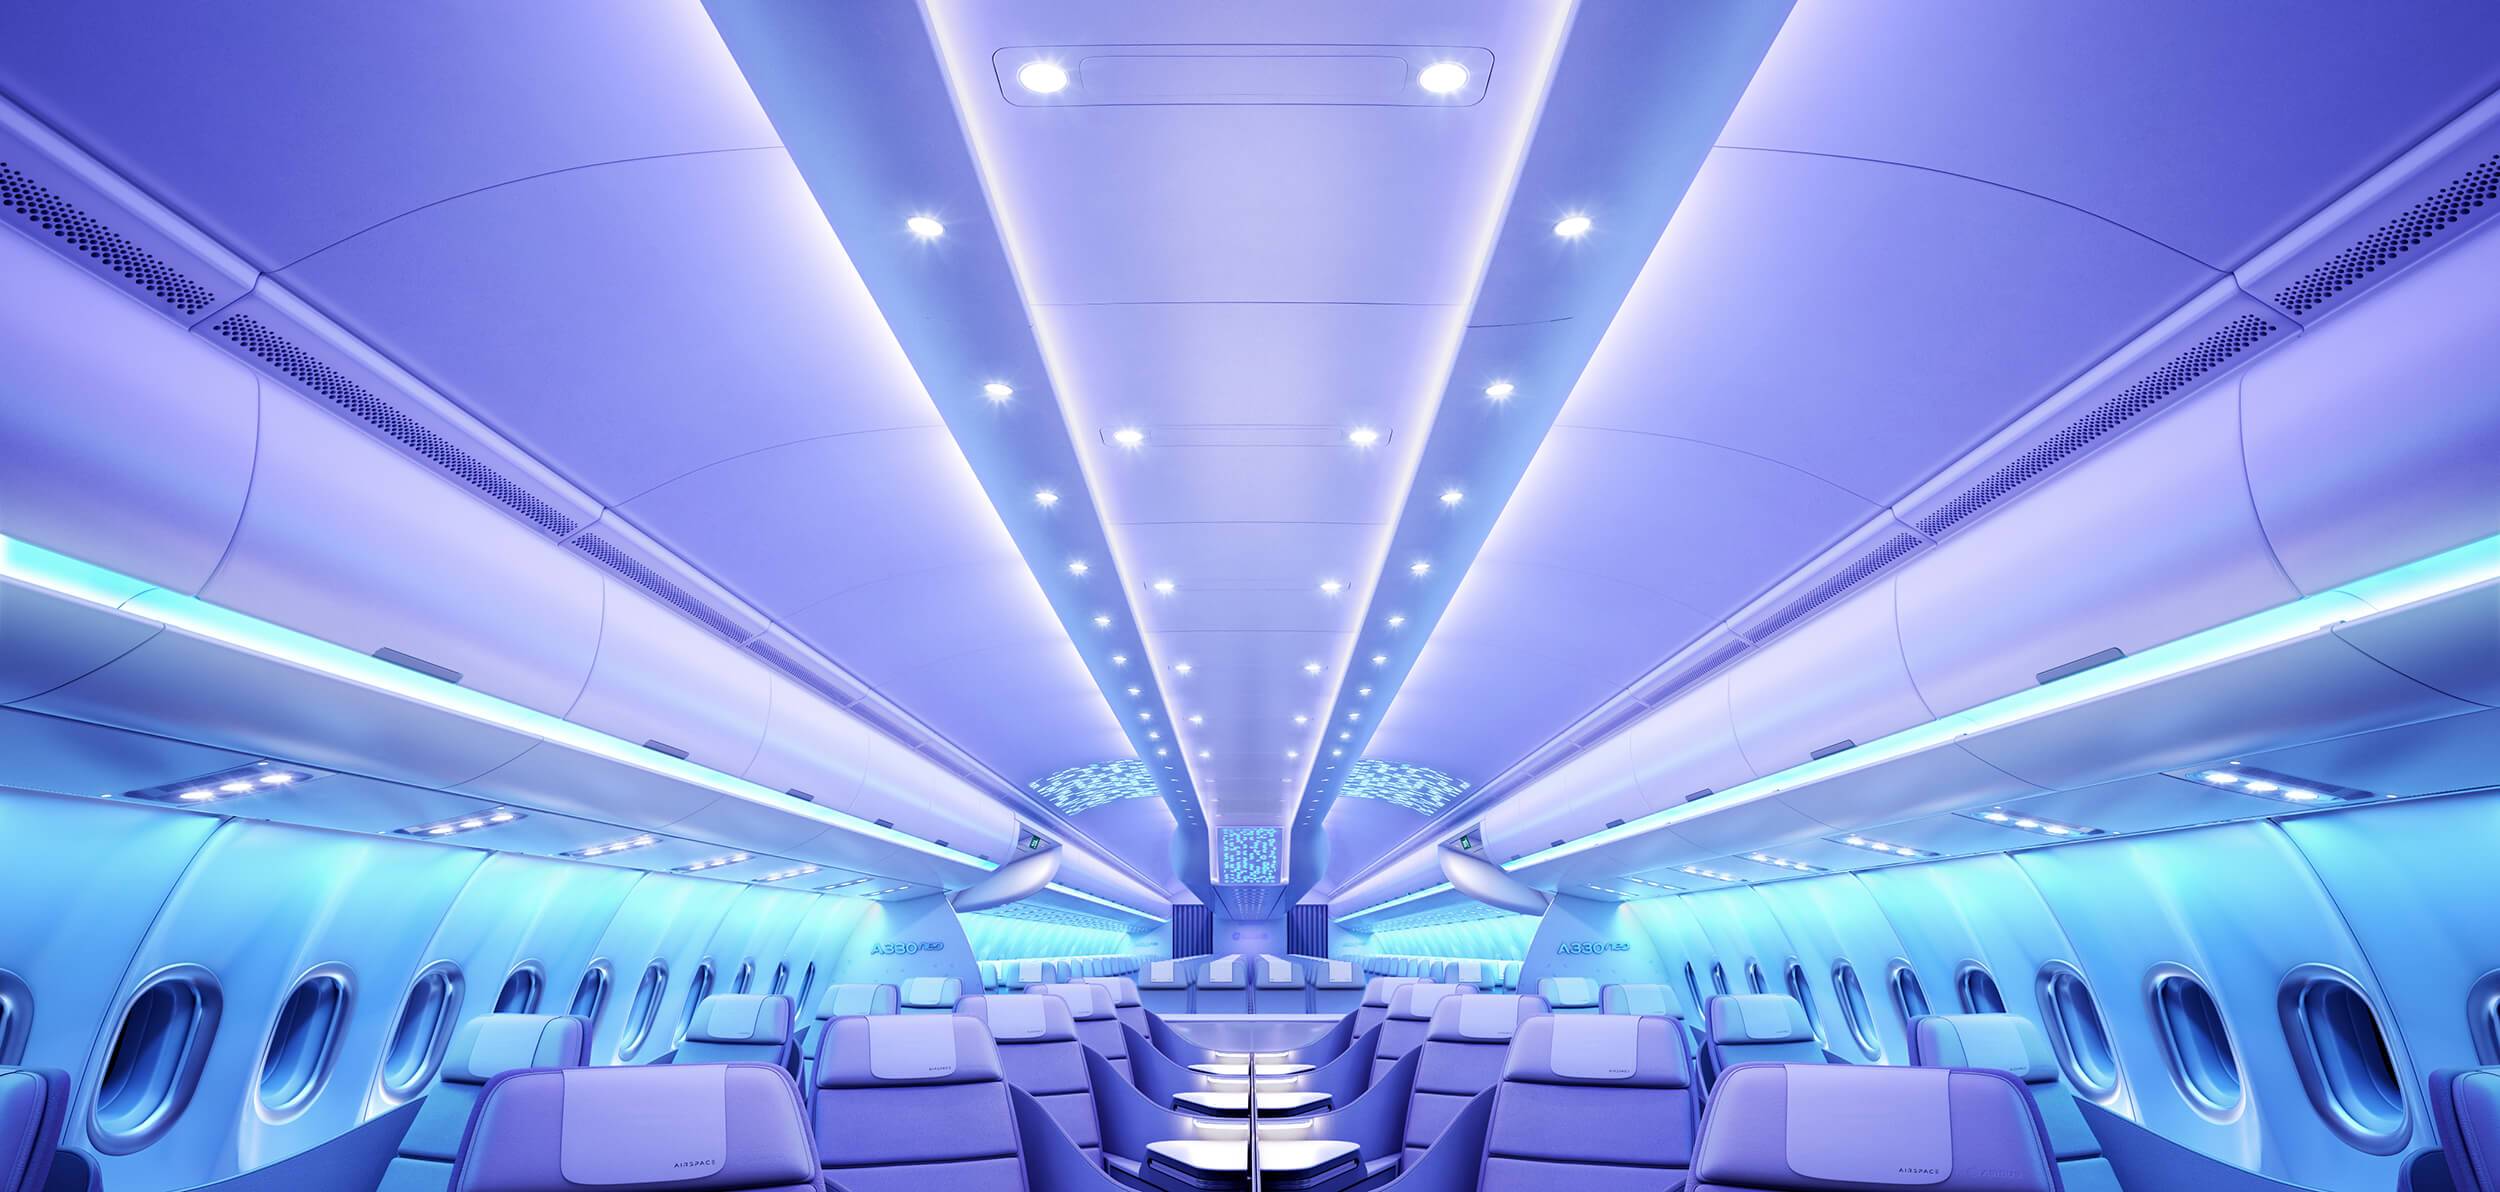 Business Class cabin on the Airbus A330neo at night time, with soothing blue and purple lighting